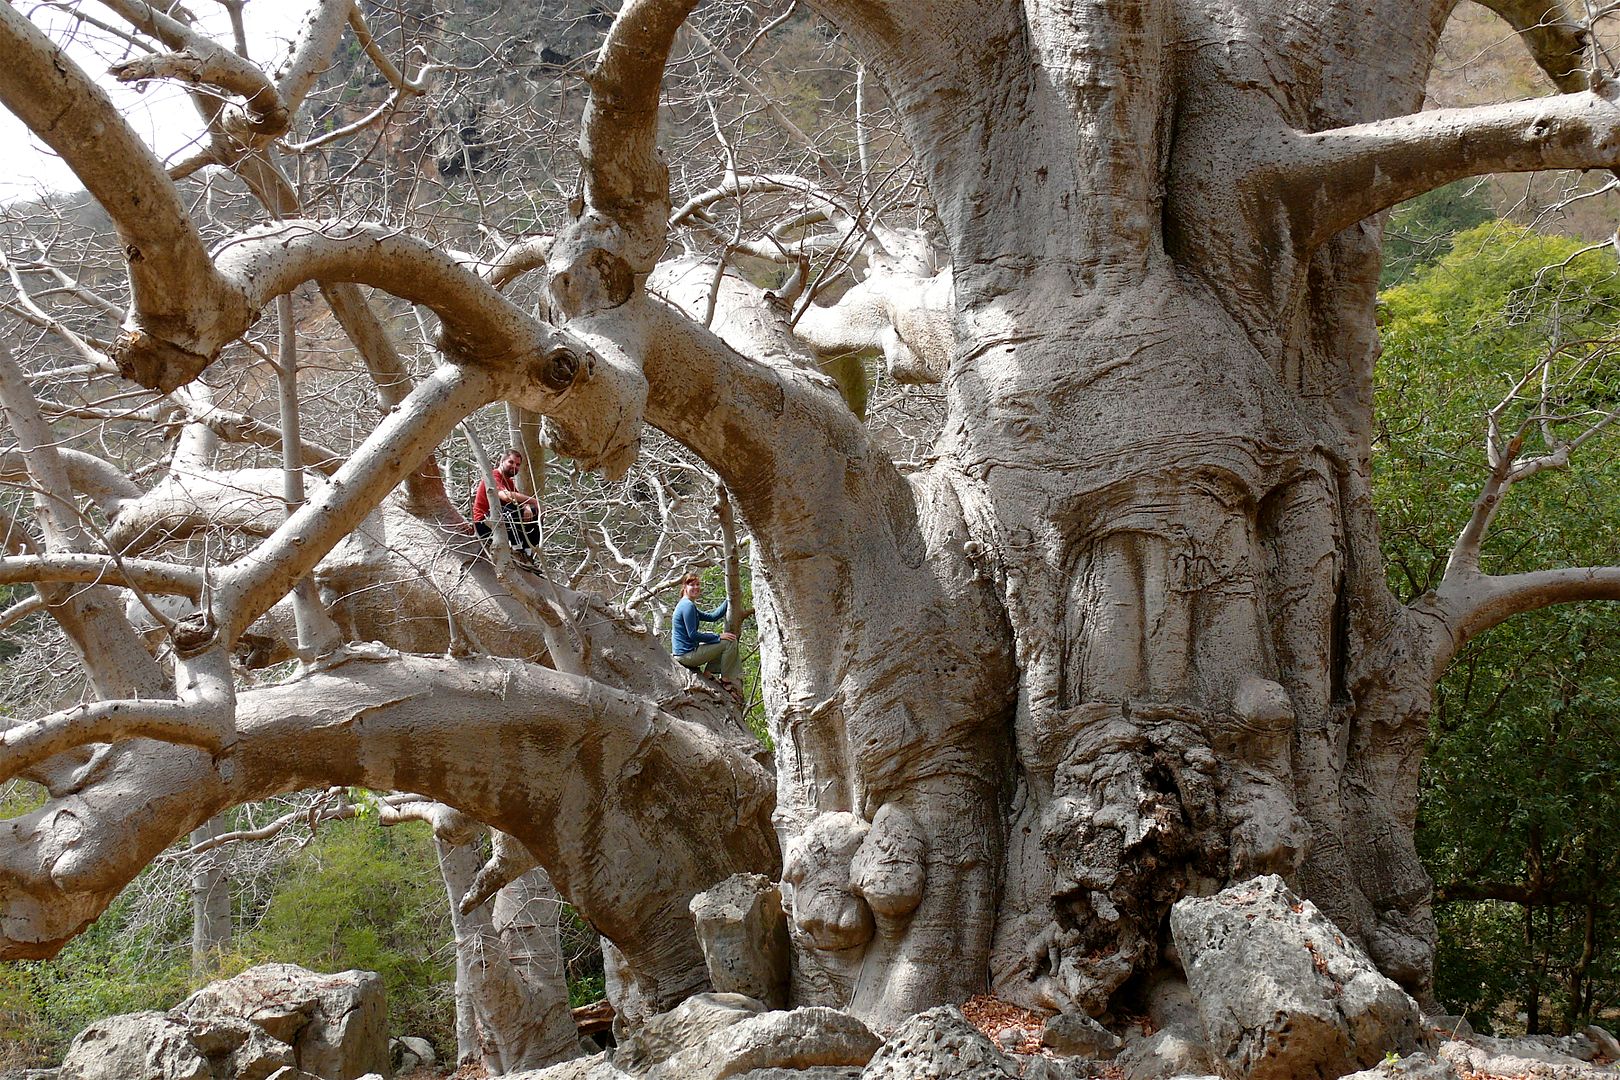 2012.02.22, I LOVE this tree! It is a variety of baobab which originate in Africa. (Salalah, Oman)